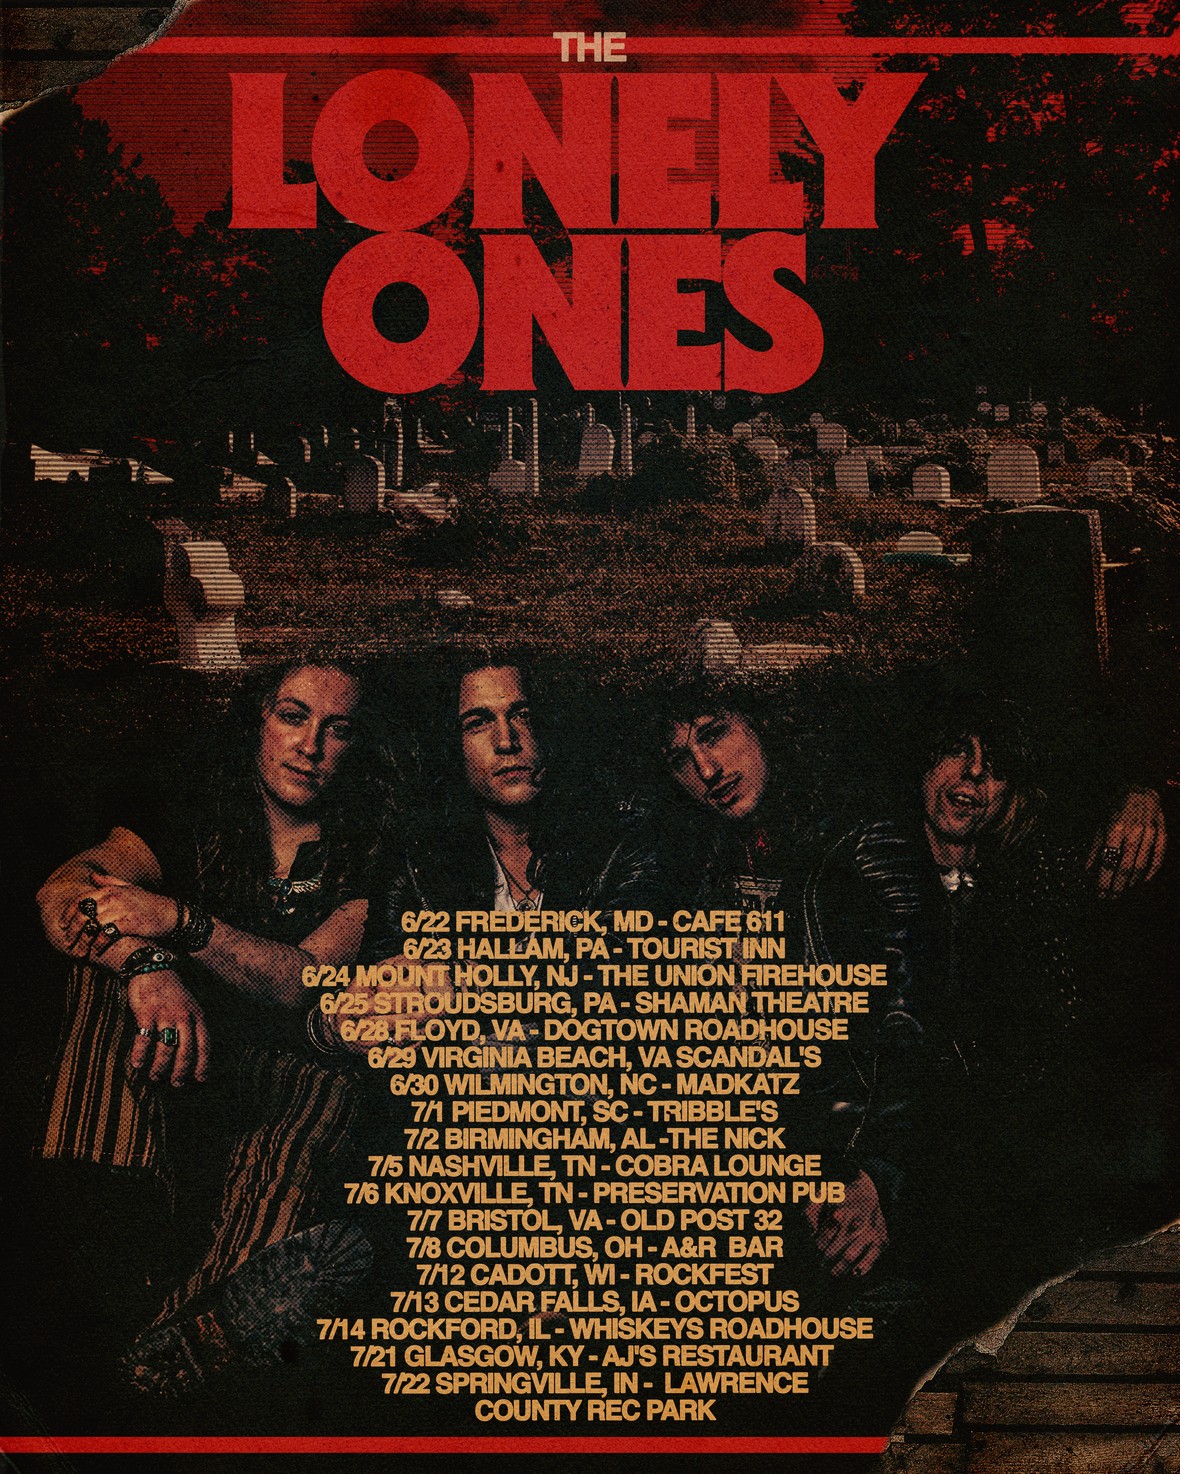 The Lonely Ones 2023 tour poster